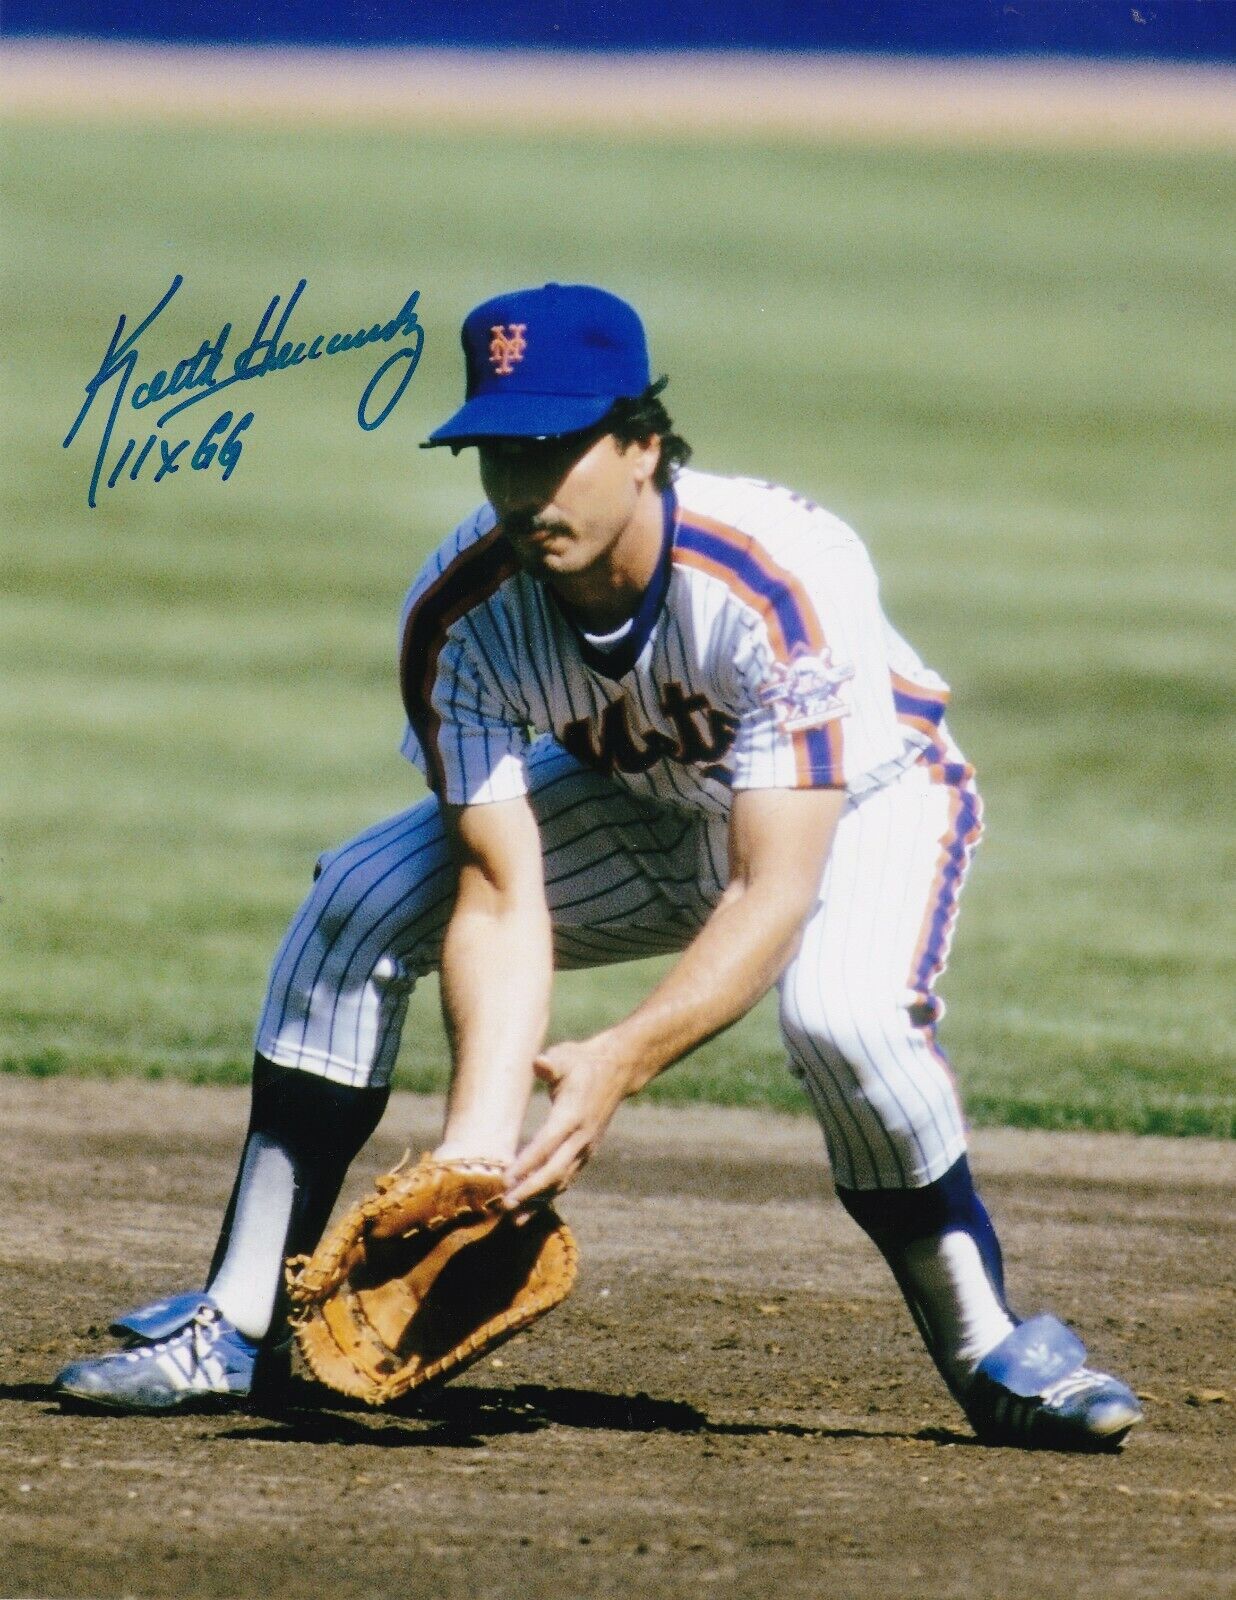 KEITH HERNANDEZ ST. LOUIS CARDINALS 11 X GOLD GLOVE PSA AUTHENTIC SIGNED  8x10